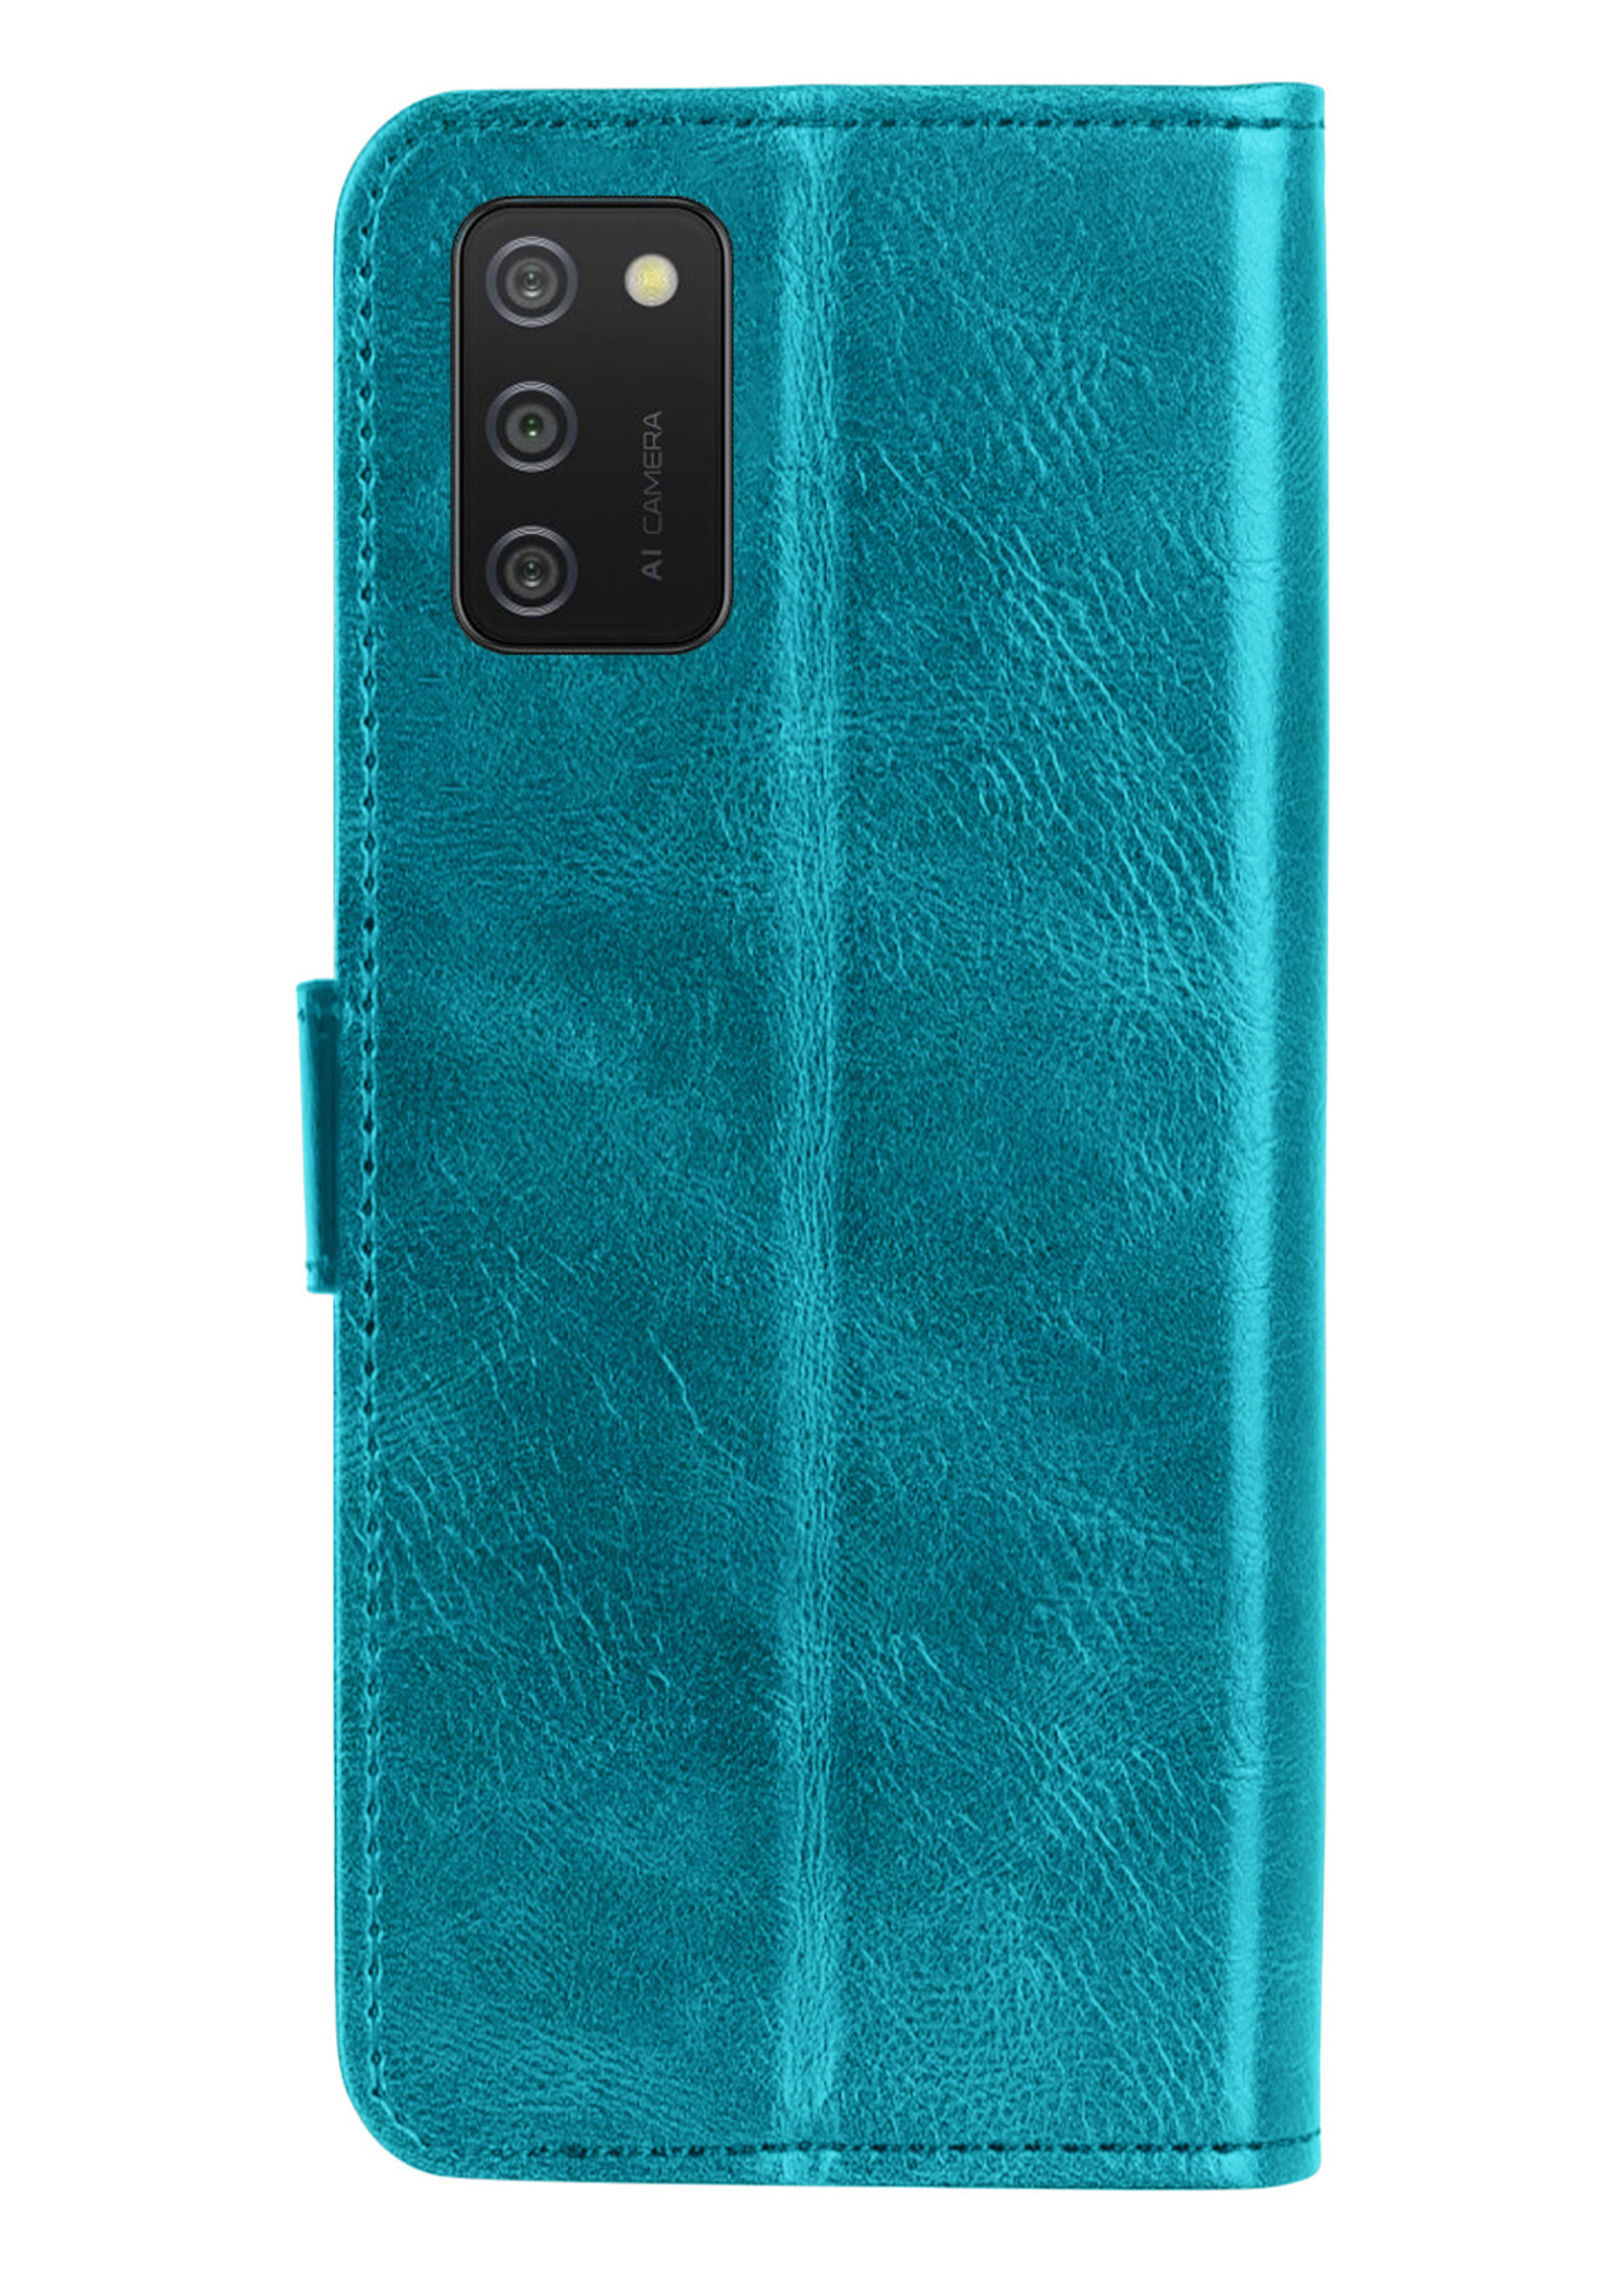 BTH Samsung A02s Hoesje Book Case Hoes - Samsung Galaxy A02s Case Hoesje Portemonnee Cover - Samsung A02s Hoes Wallet Case Hoesje - Turquoise